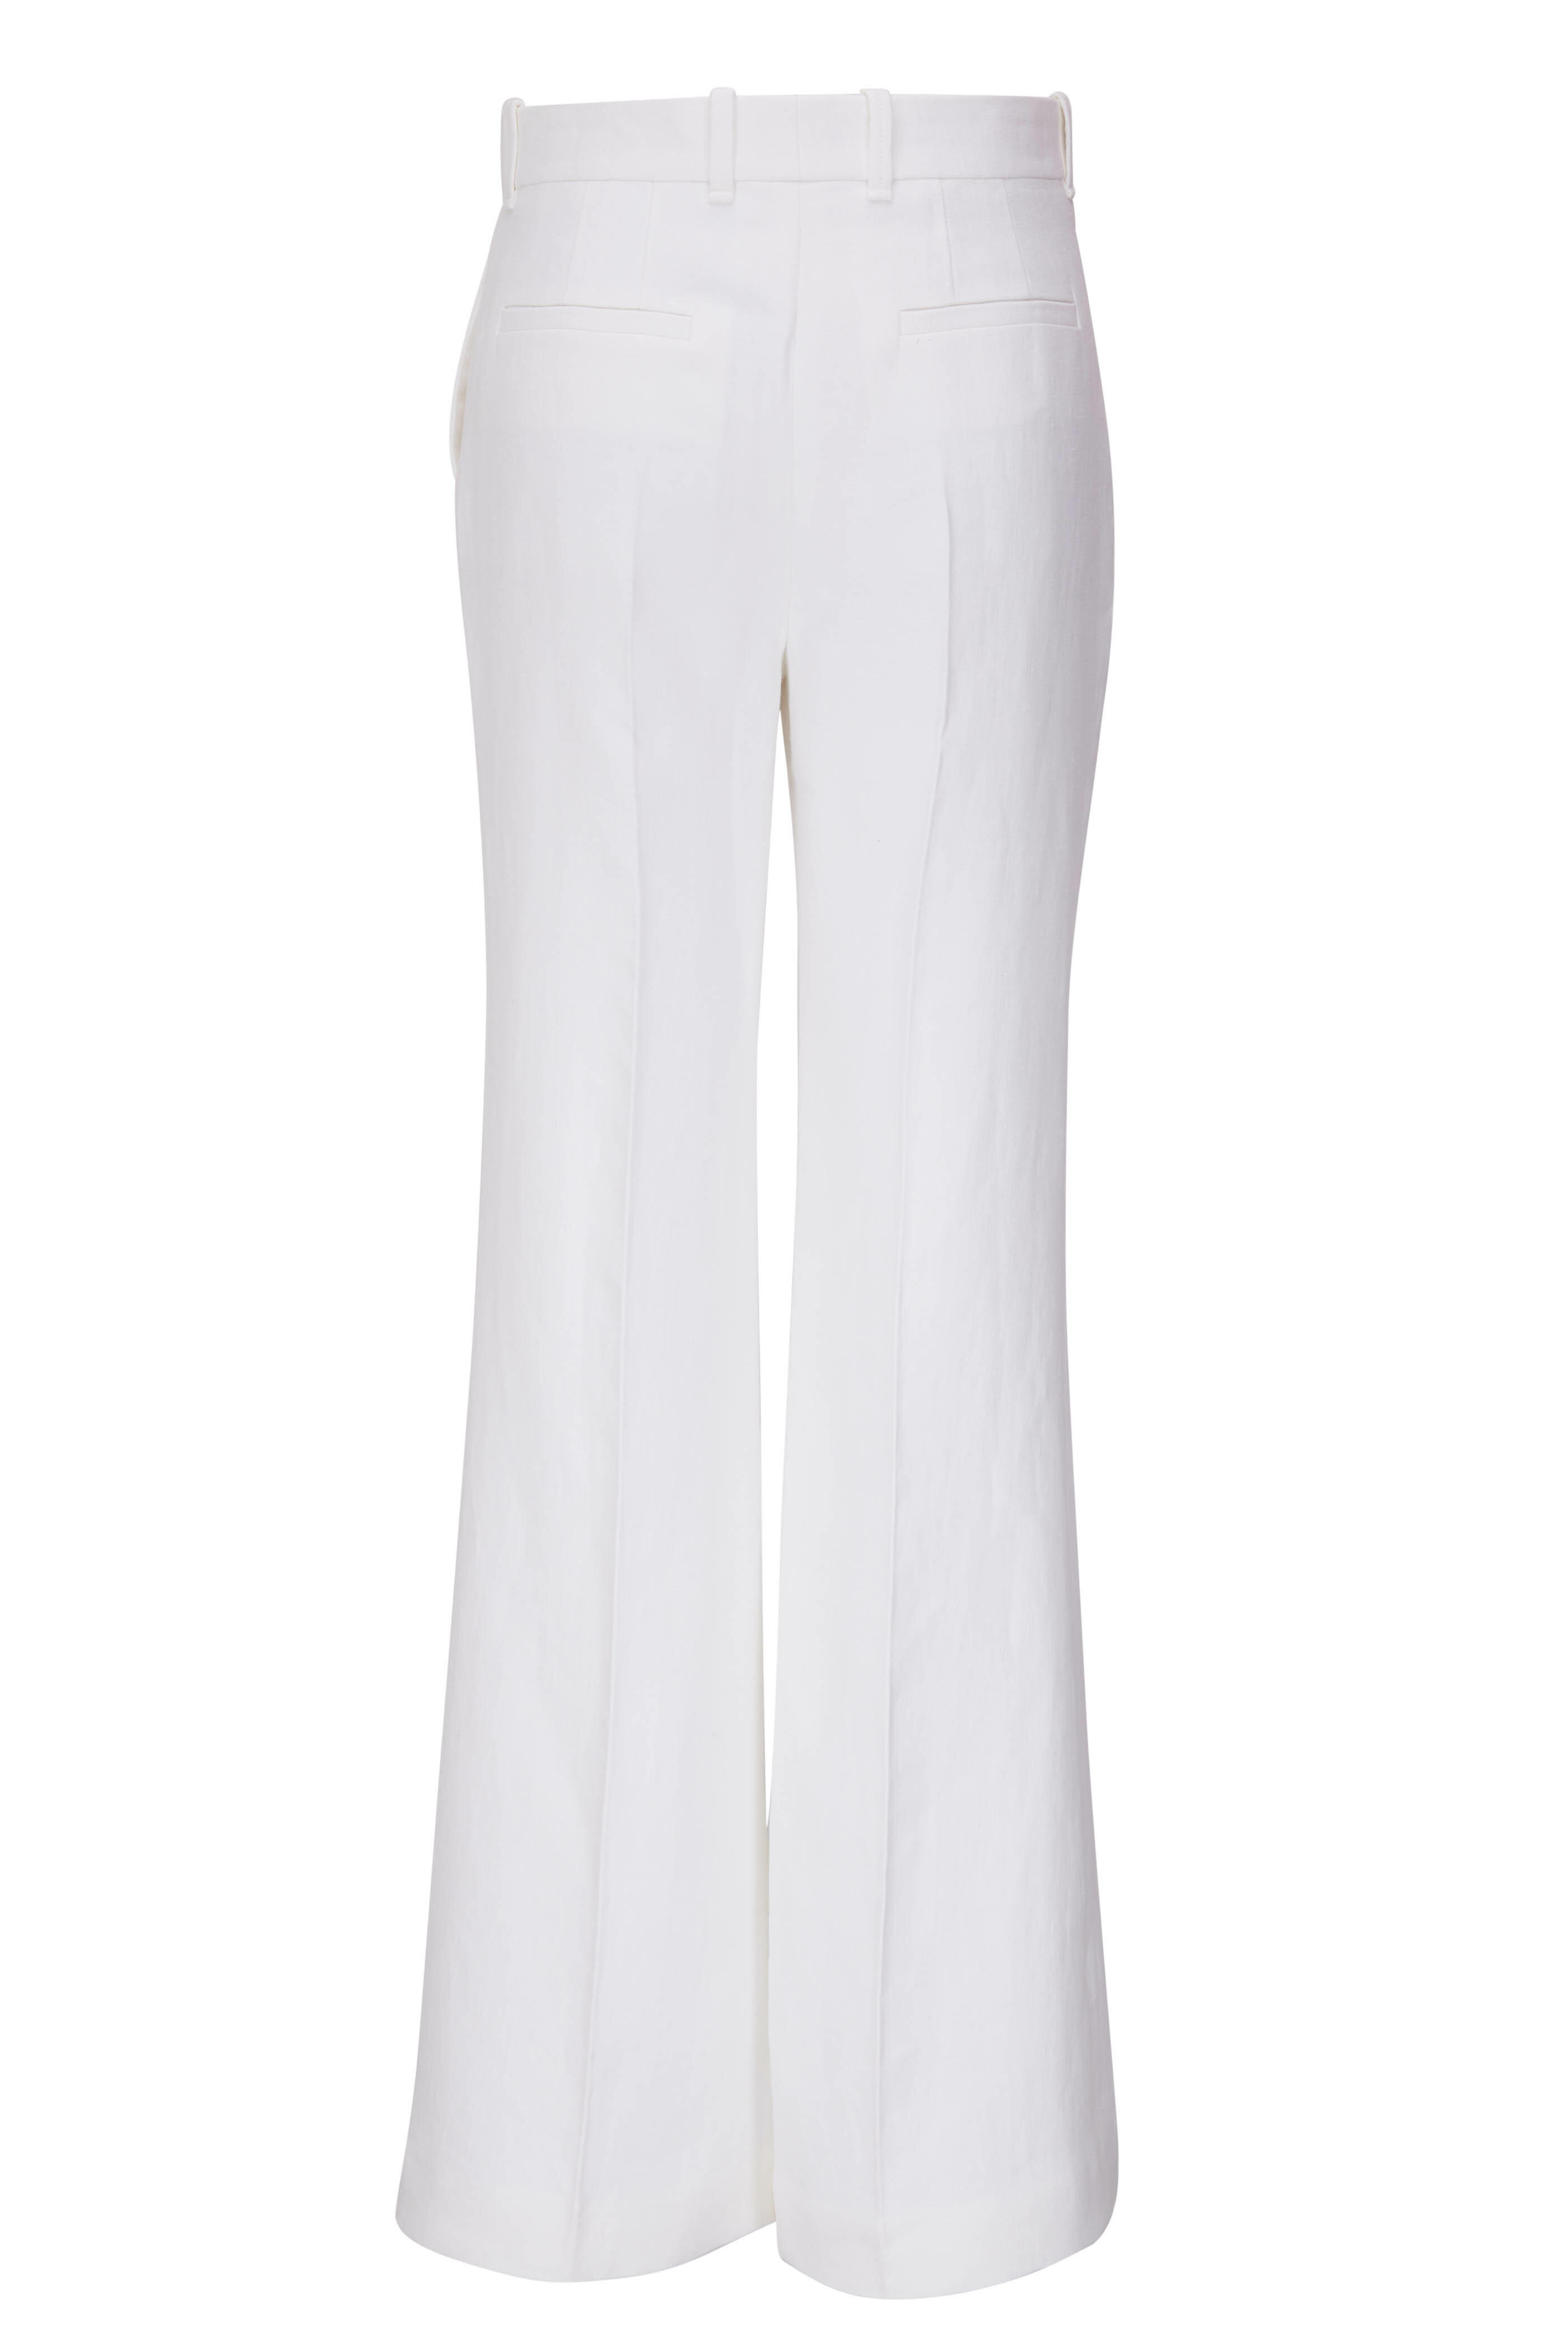 Chloé - Double Linen White Flared Pant | Mitchell Stores